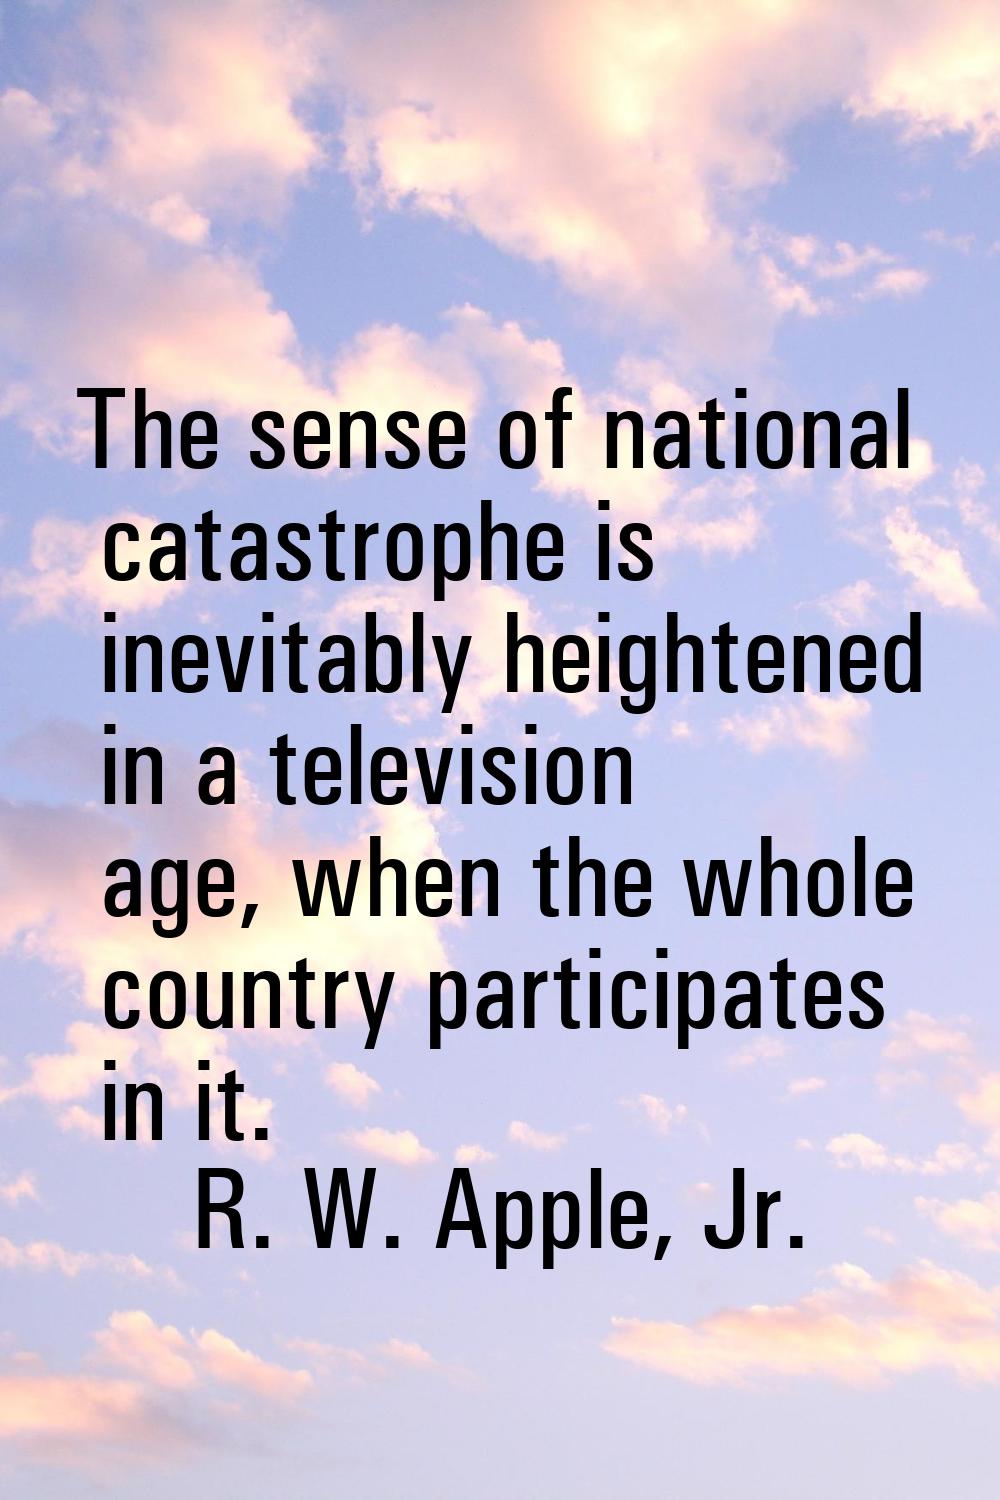 The sense of national catastrophe is inevitably heightened in a television age, when the whole coun